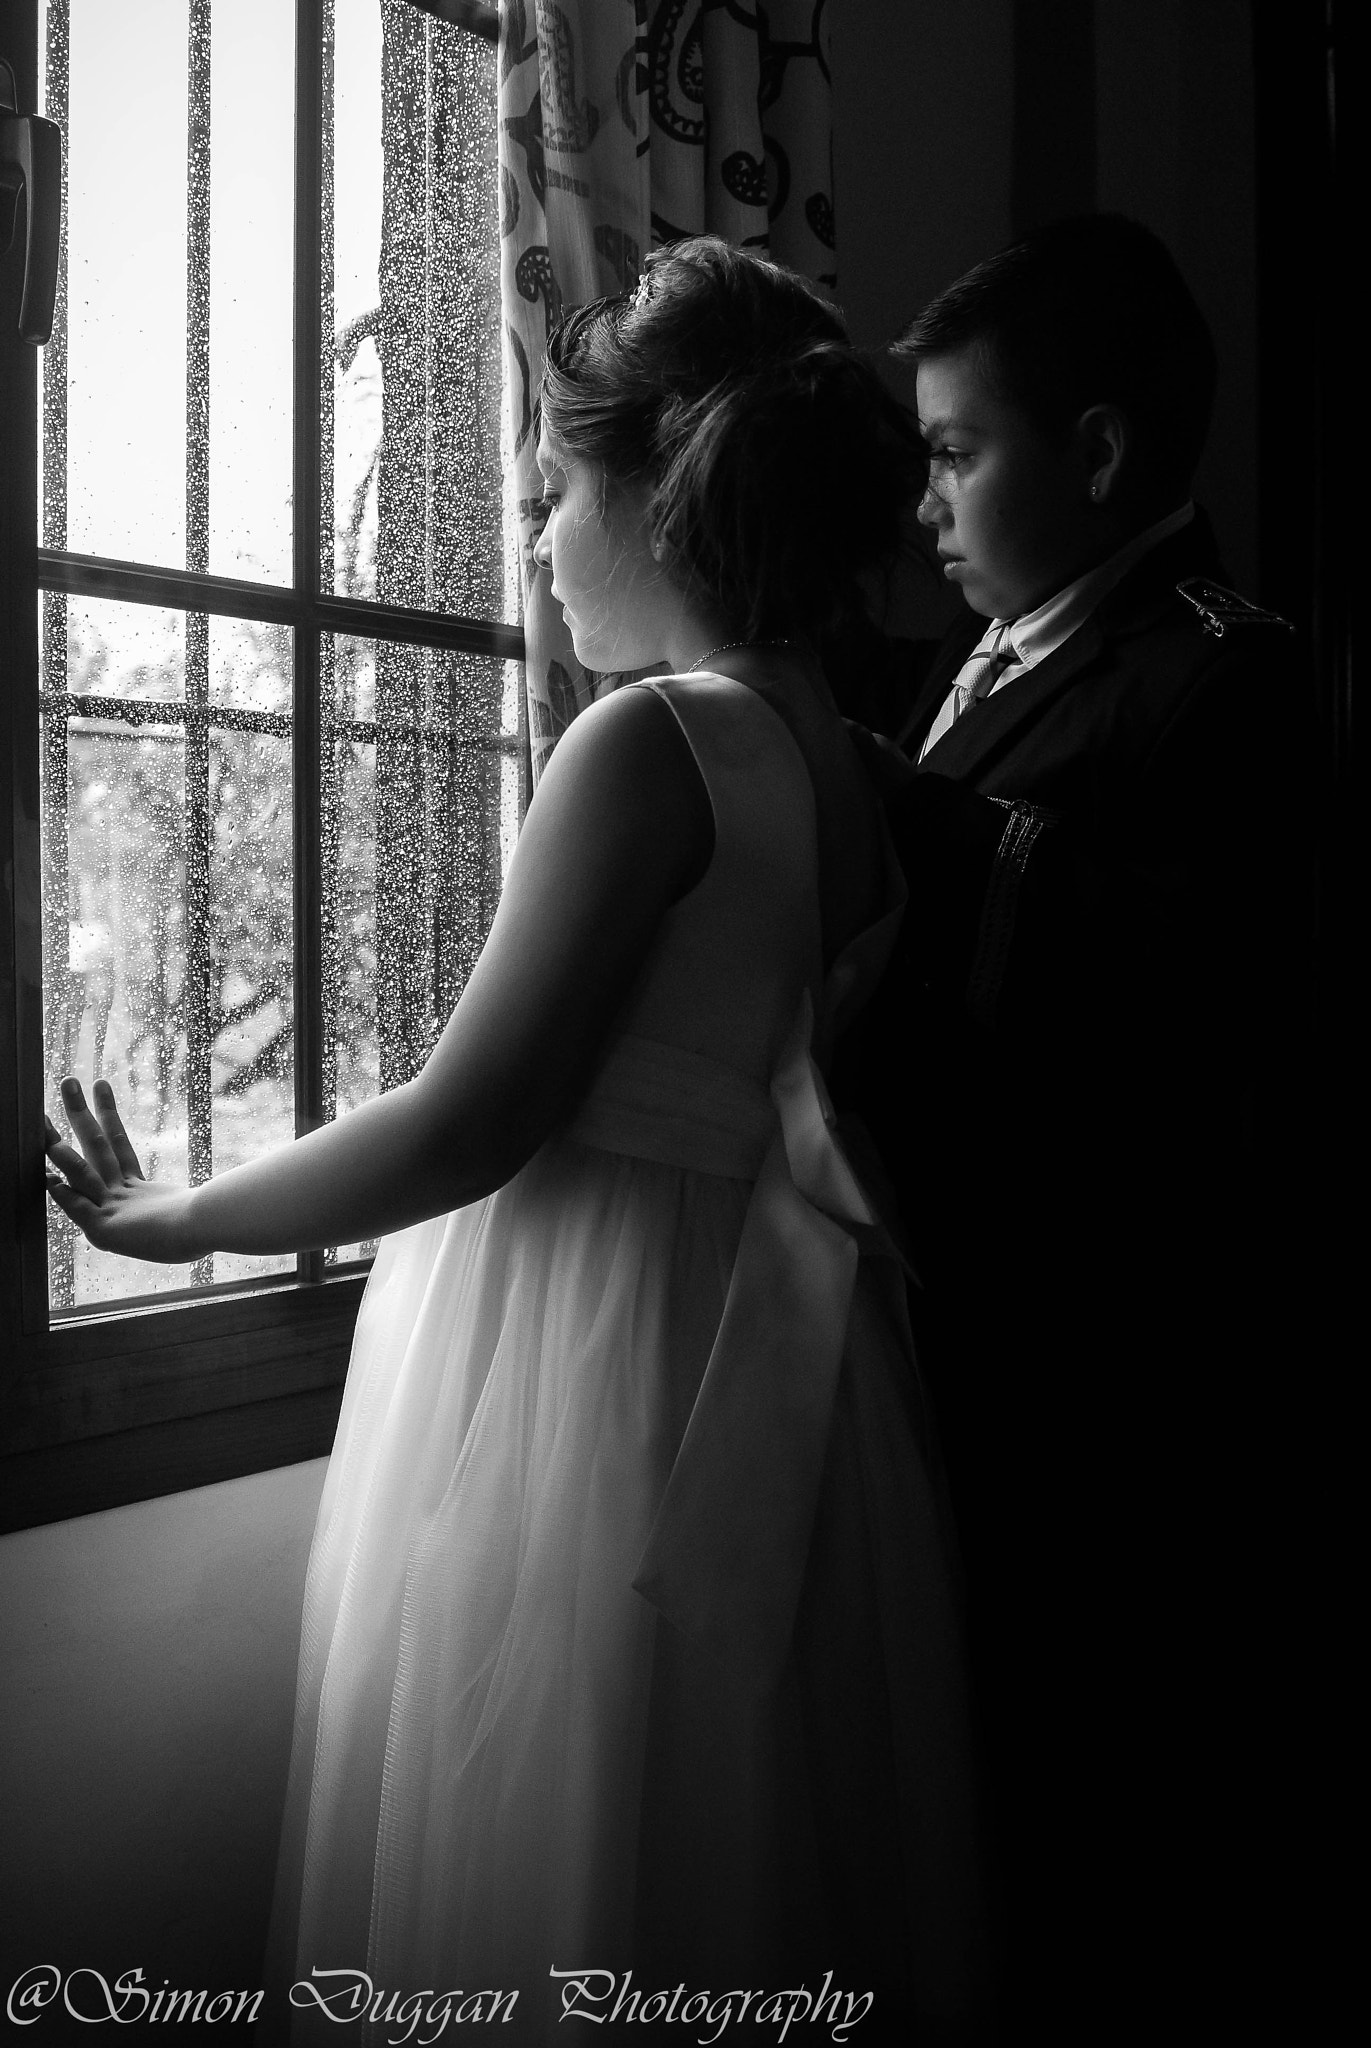 Nikon D200 + AF Zoom-Nikkor 28-200mm f/3.5-5.6D IF sample photo. Zac and chloe first communion  photography